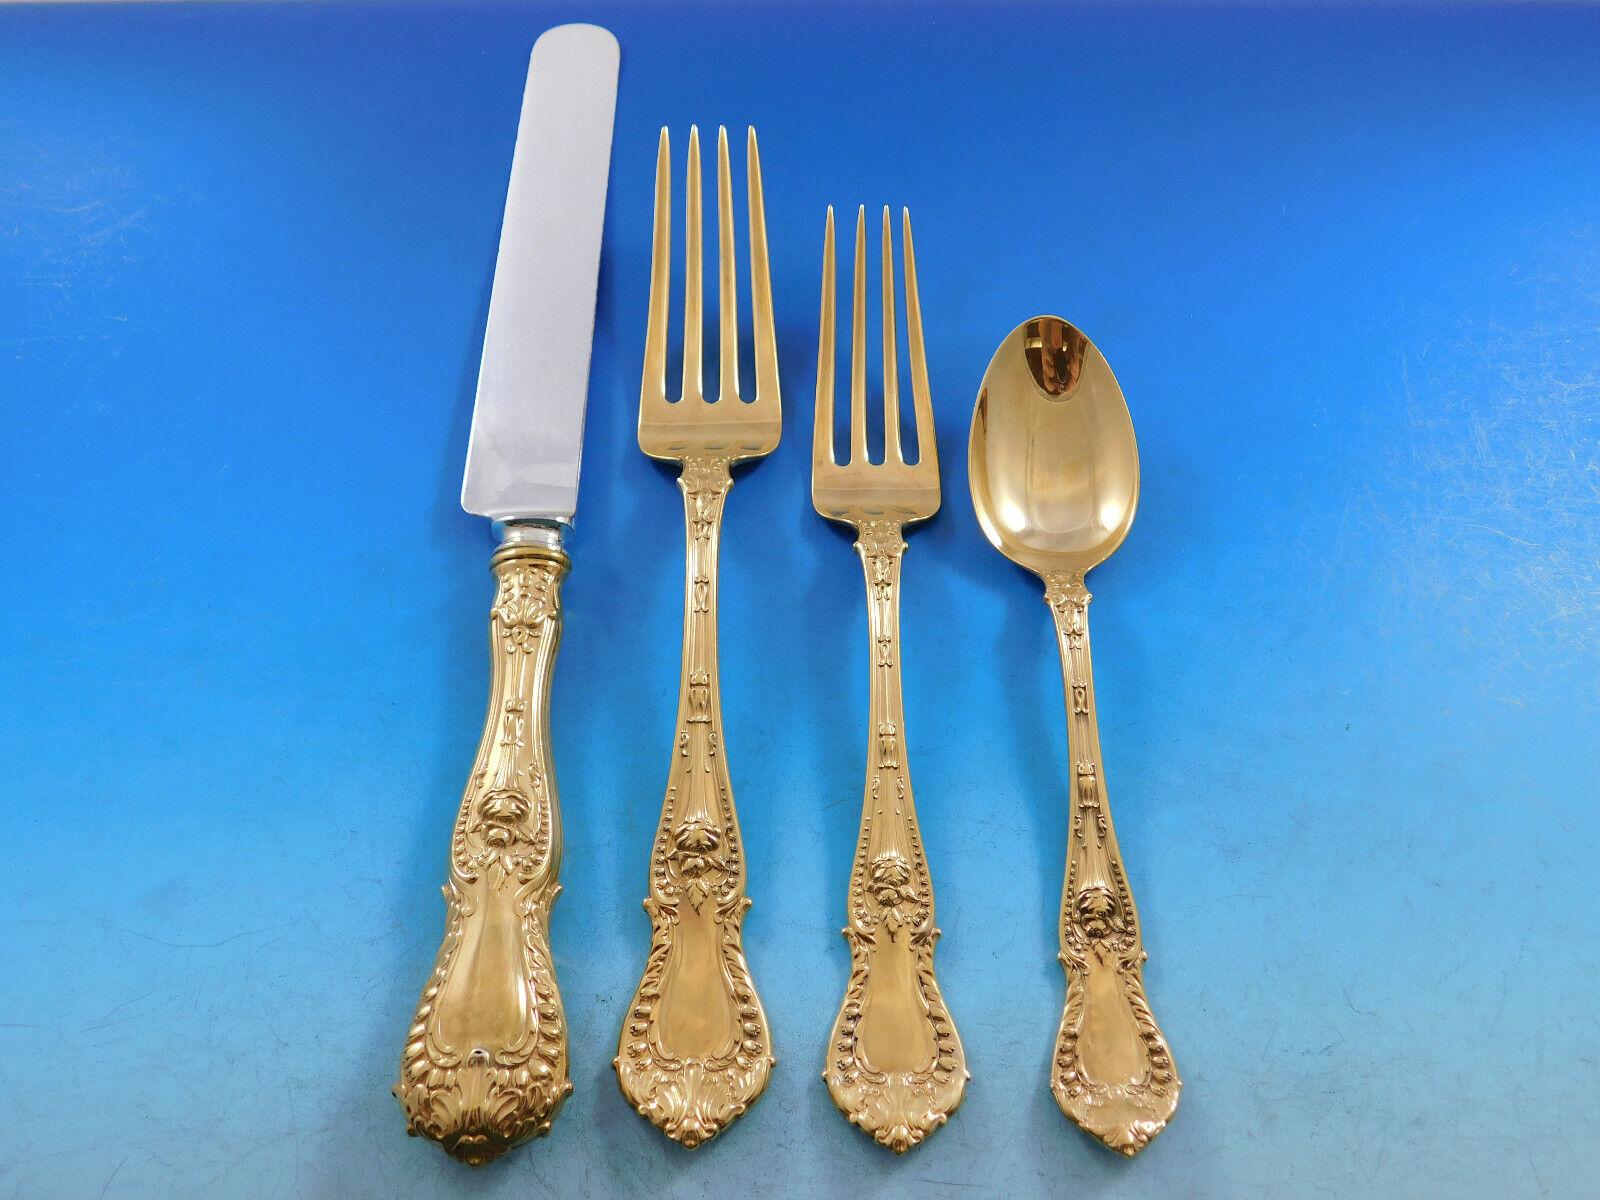 Fantastic Dinner Size Dorothy Vernon Gold by Whiting Sterling Silver Flatware set - 61 pieces. This set includes:

12 Large Dinner Size Knives, 9 7/8